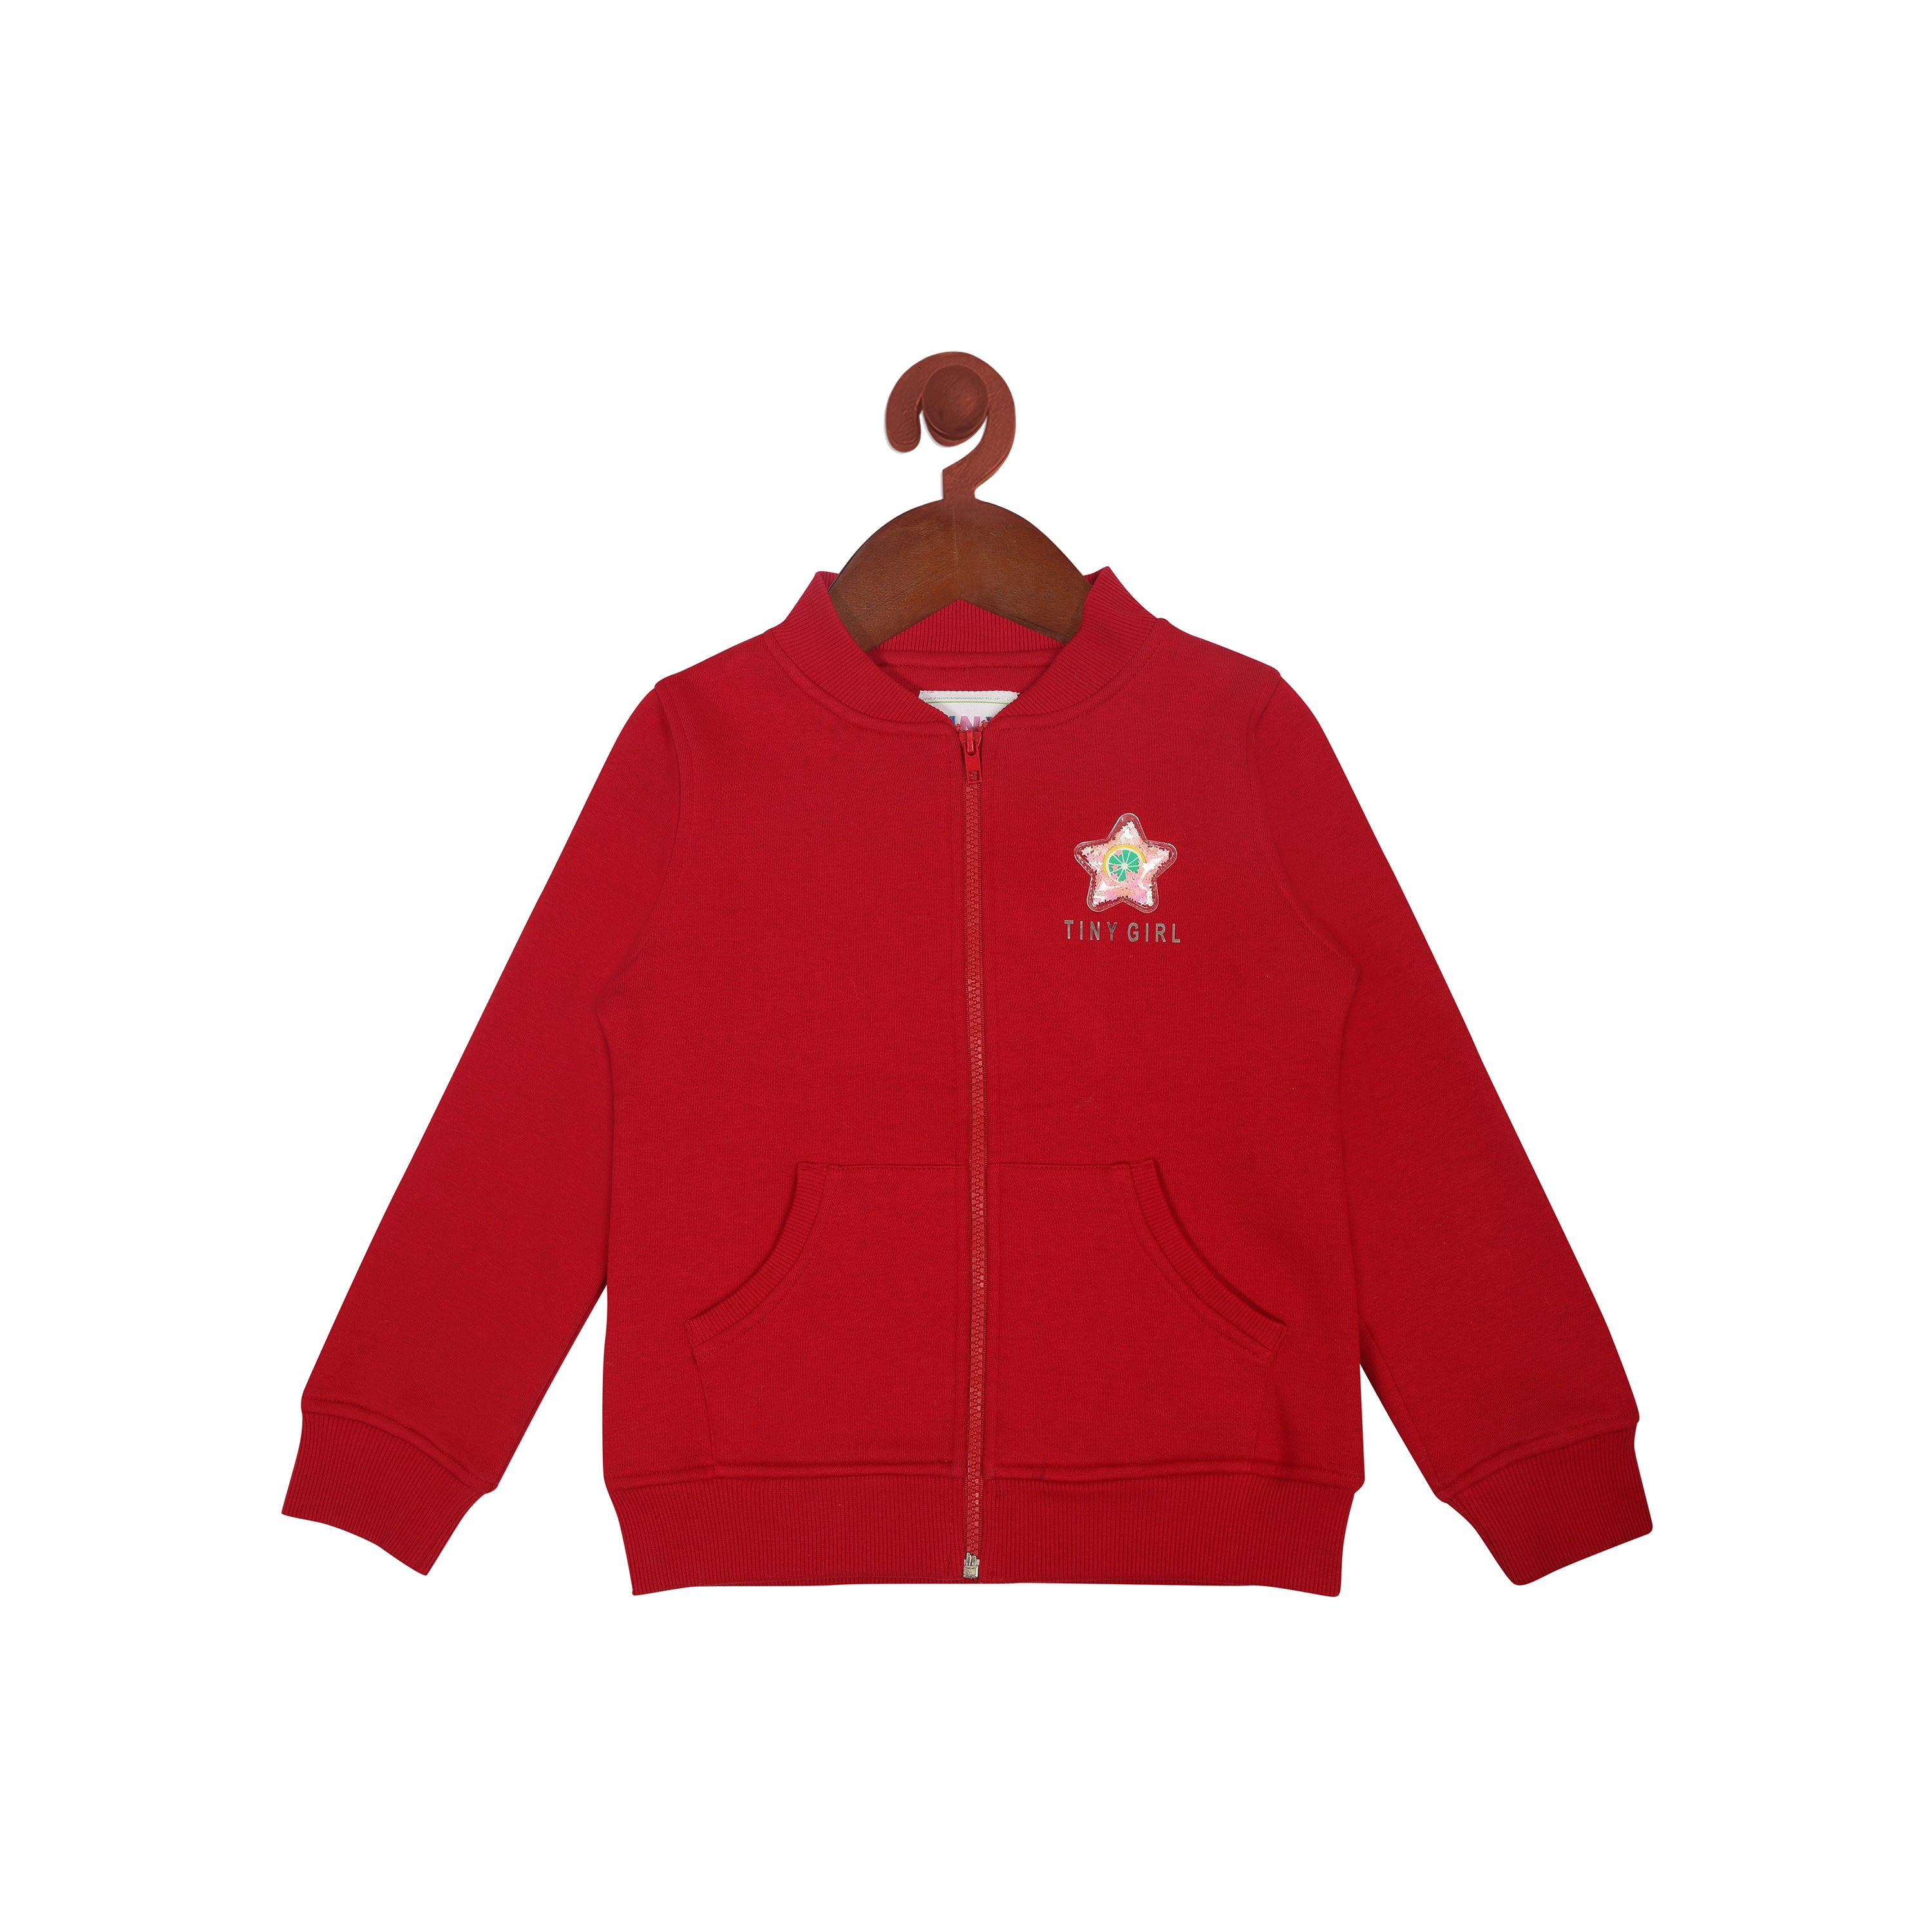 Tiny Girl Basic Zipper Sweatshirt With Front Pockets In Red